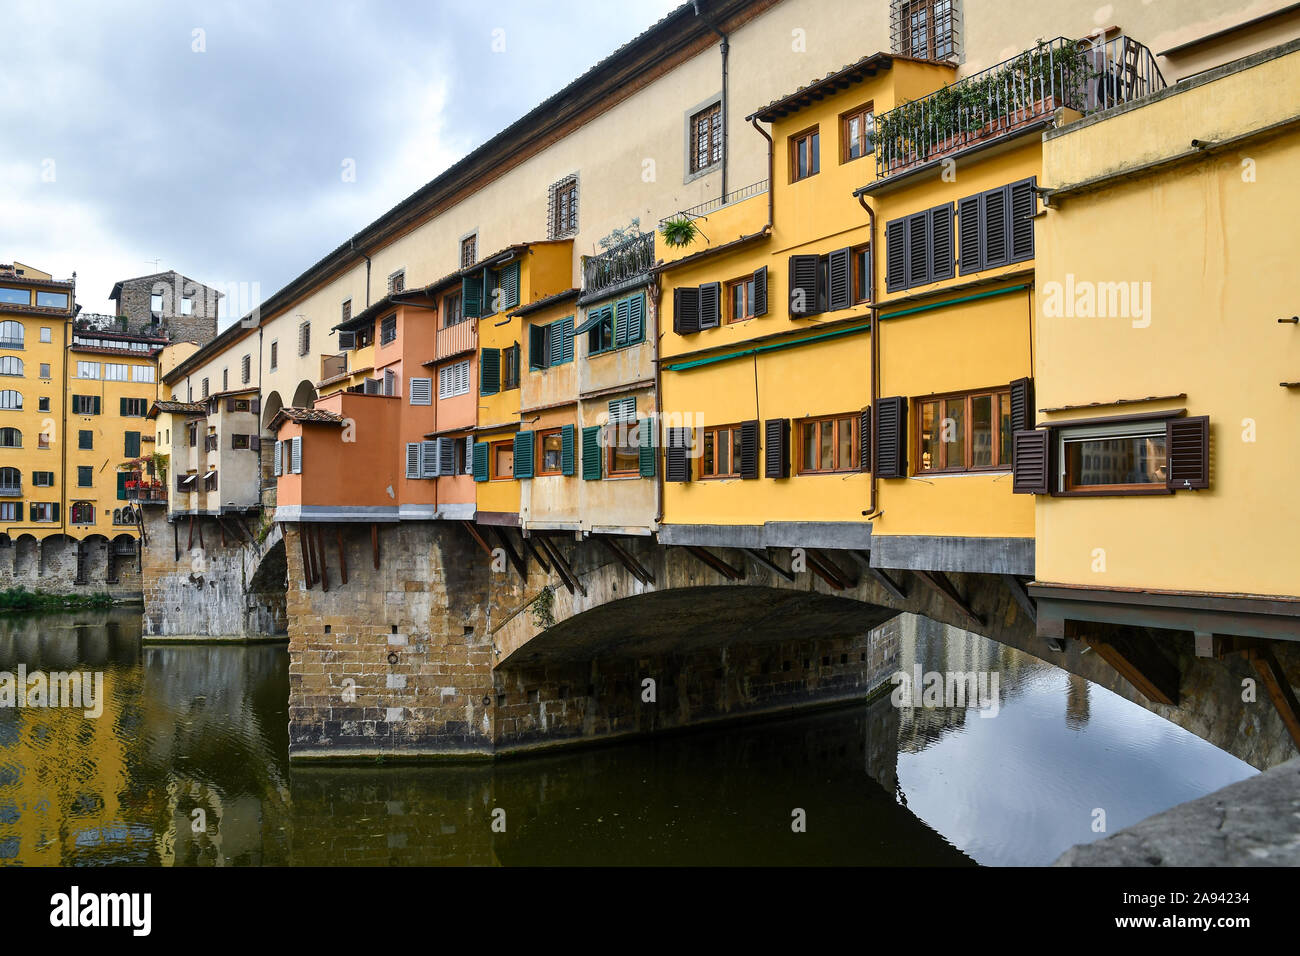 View of Ponte Vecchio medieval bridge in the historic centre of Florence, Unesco World Heritage Site, on Arno River, Tuscany, Italy Stock Photo